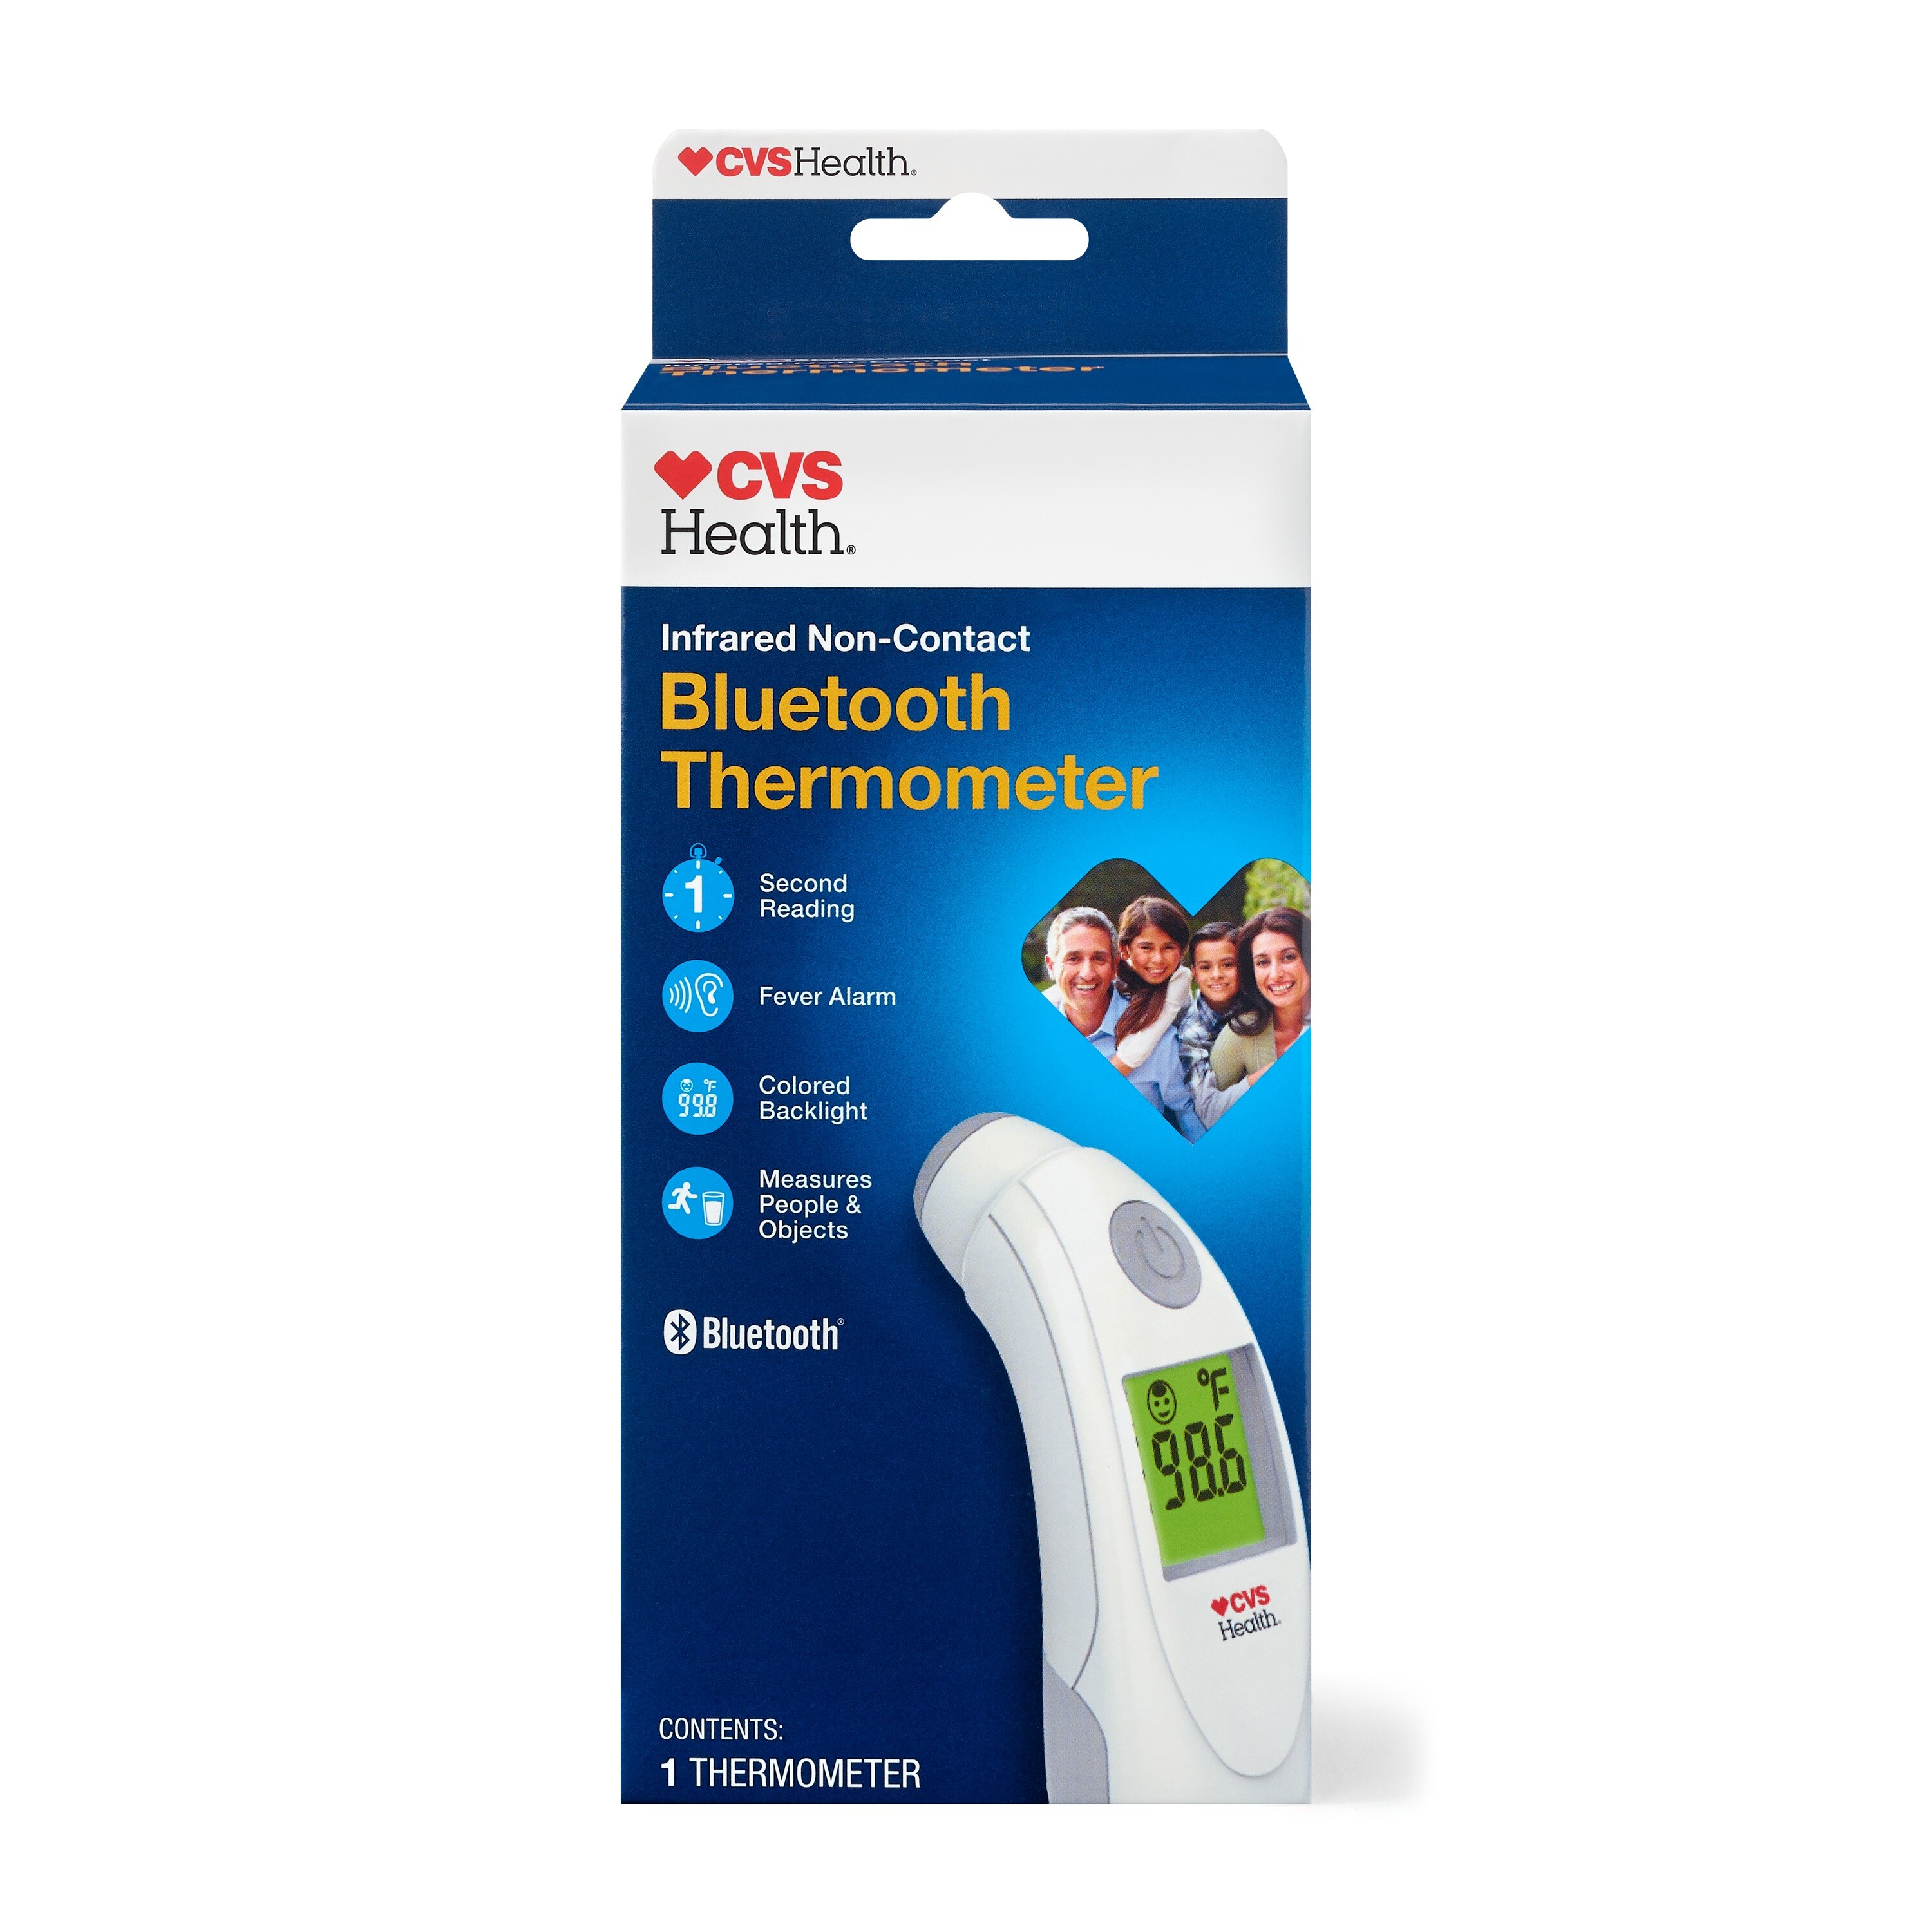 CVS Infrared Noncontact Bluetooth Thermometer